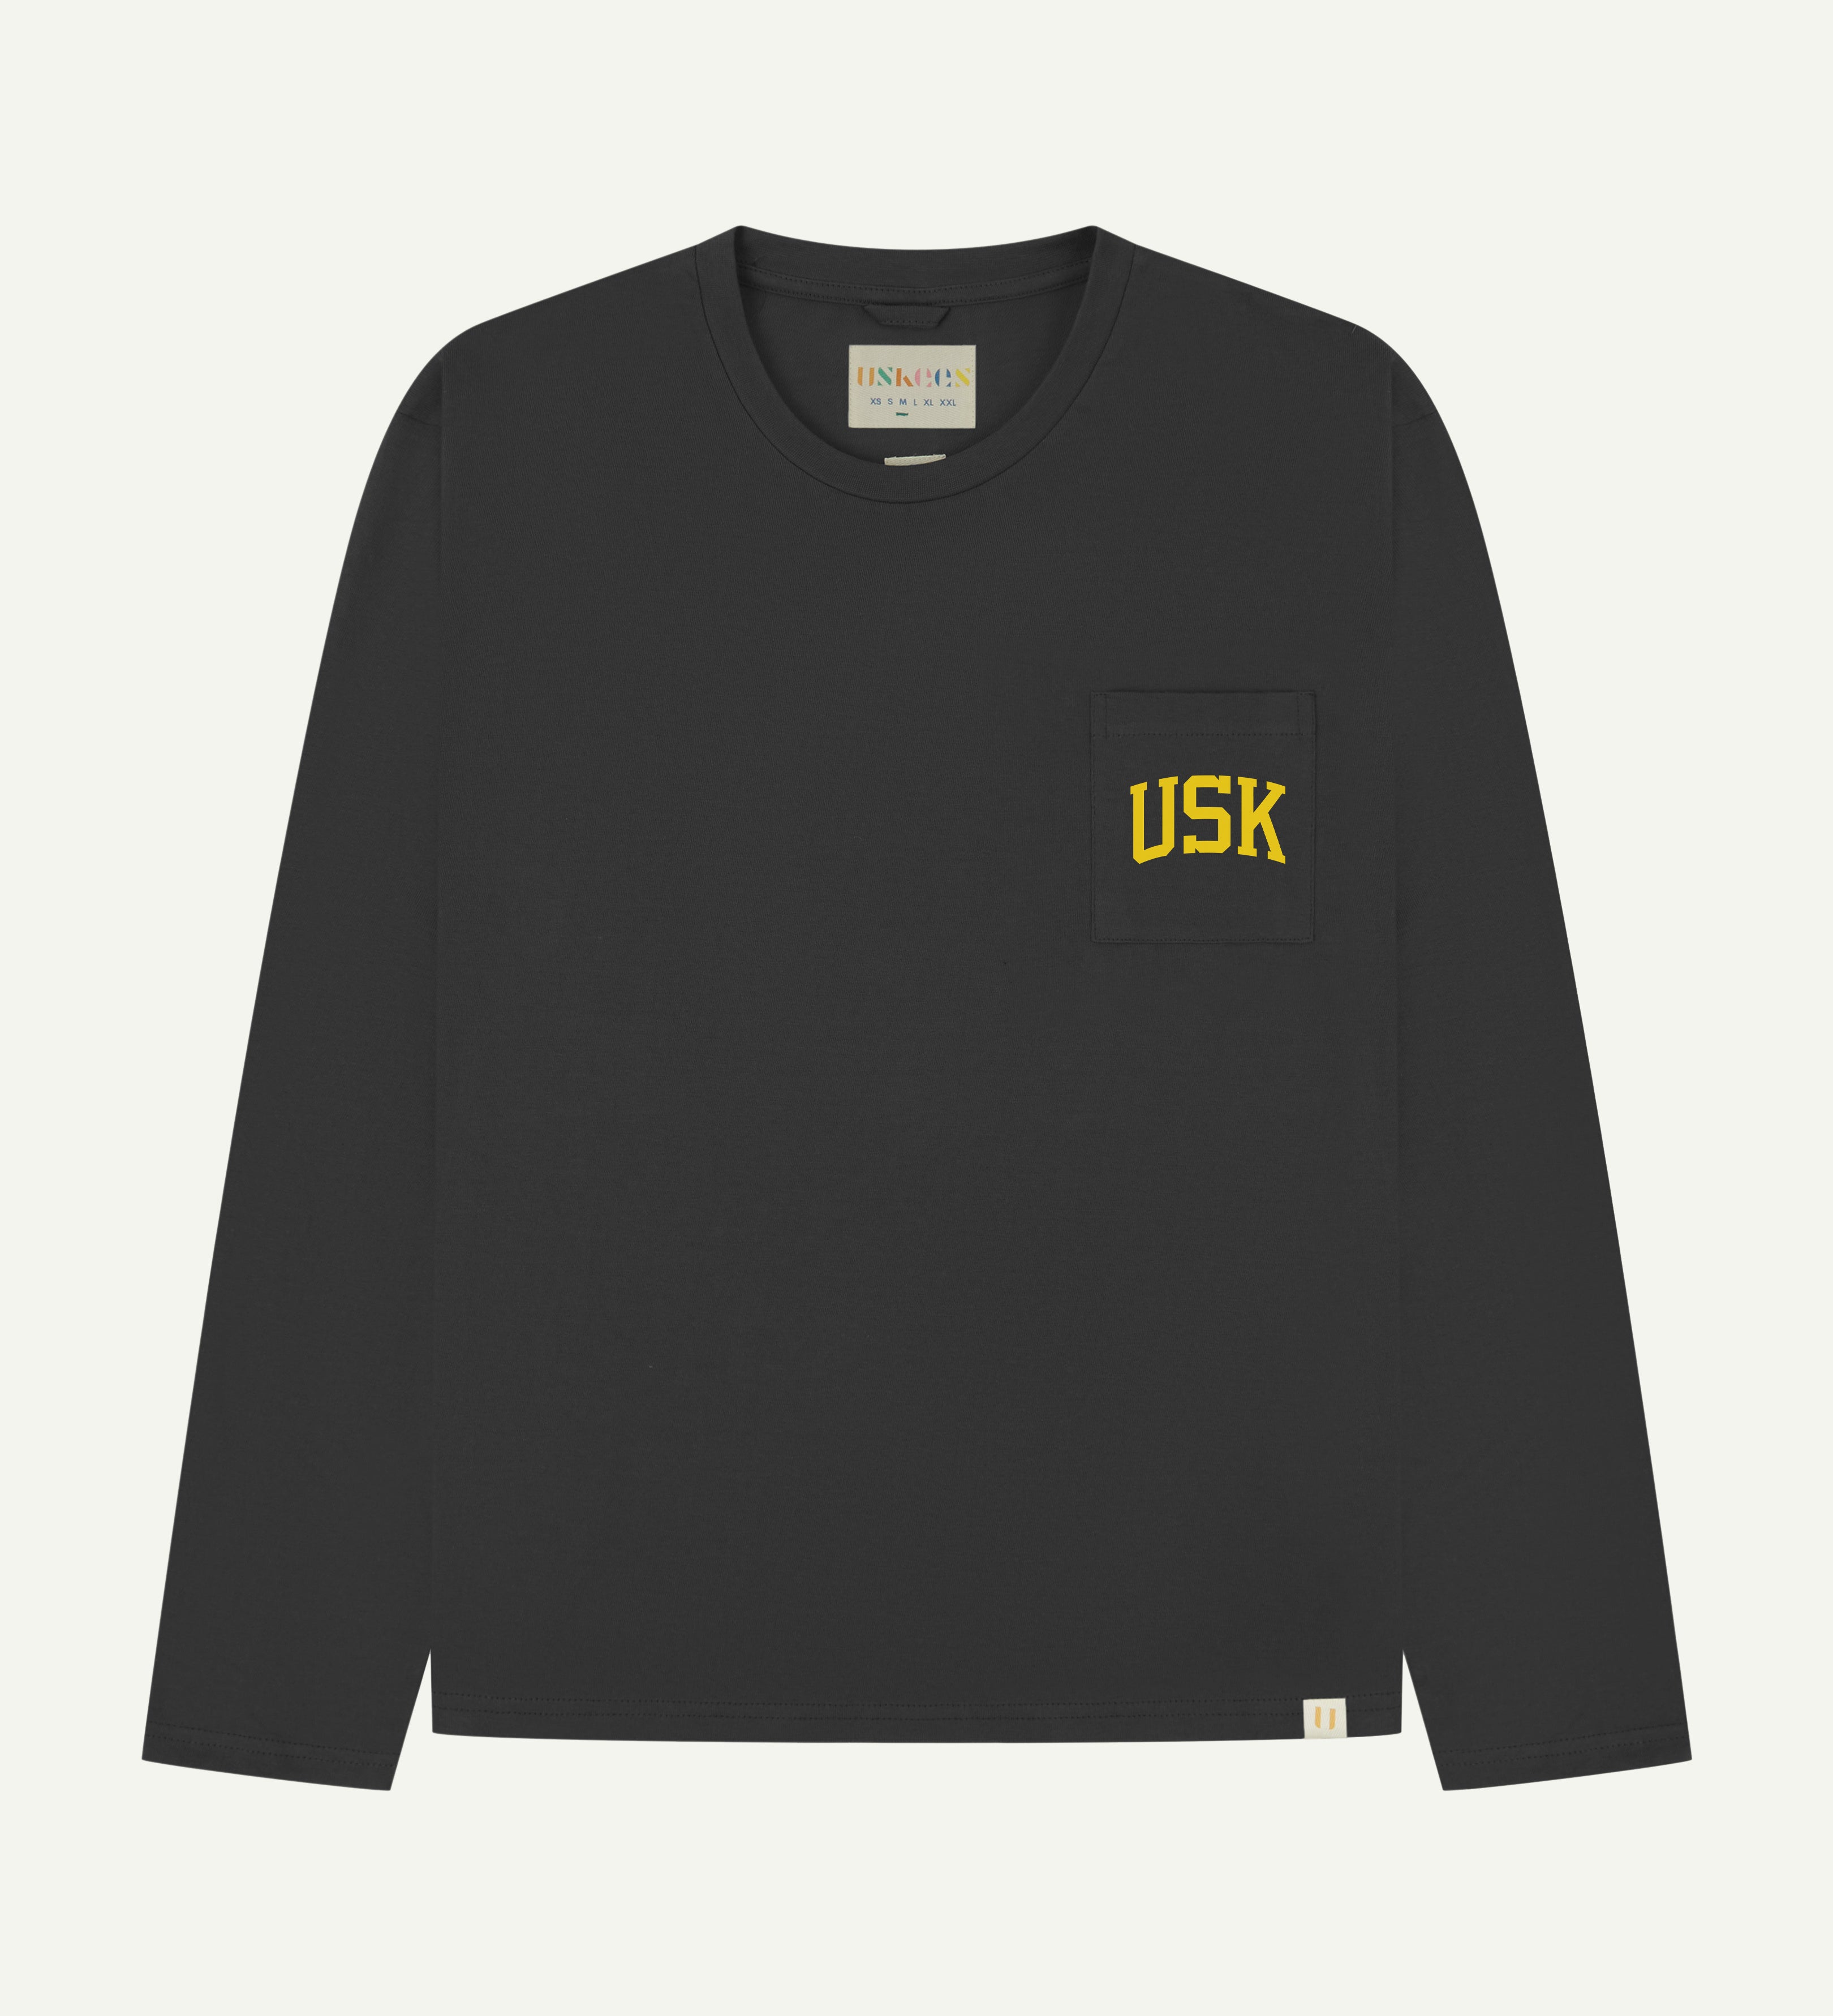 front flat shot of the uskees faded black long sleeved Tee for men showing the yellow USK logo on the chest pocket